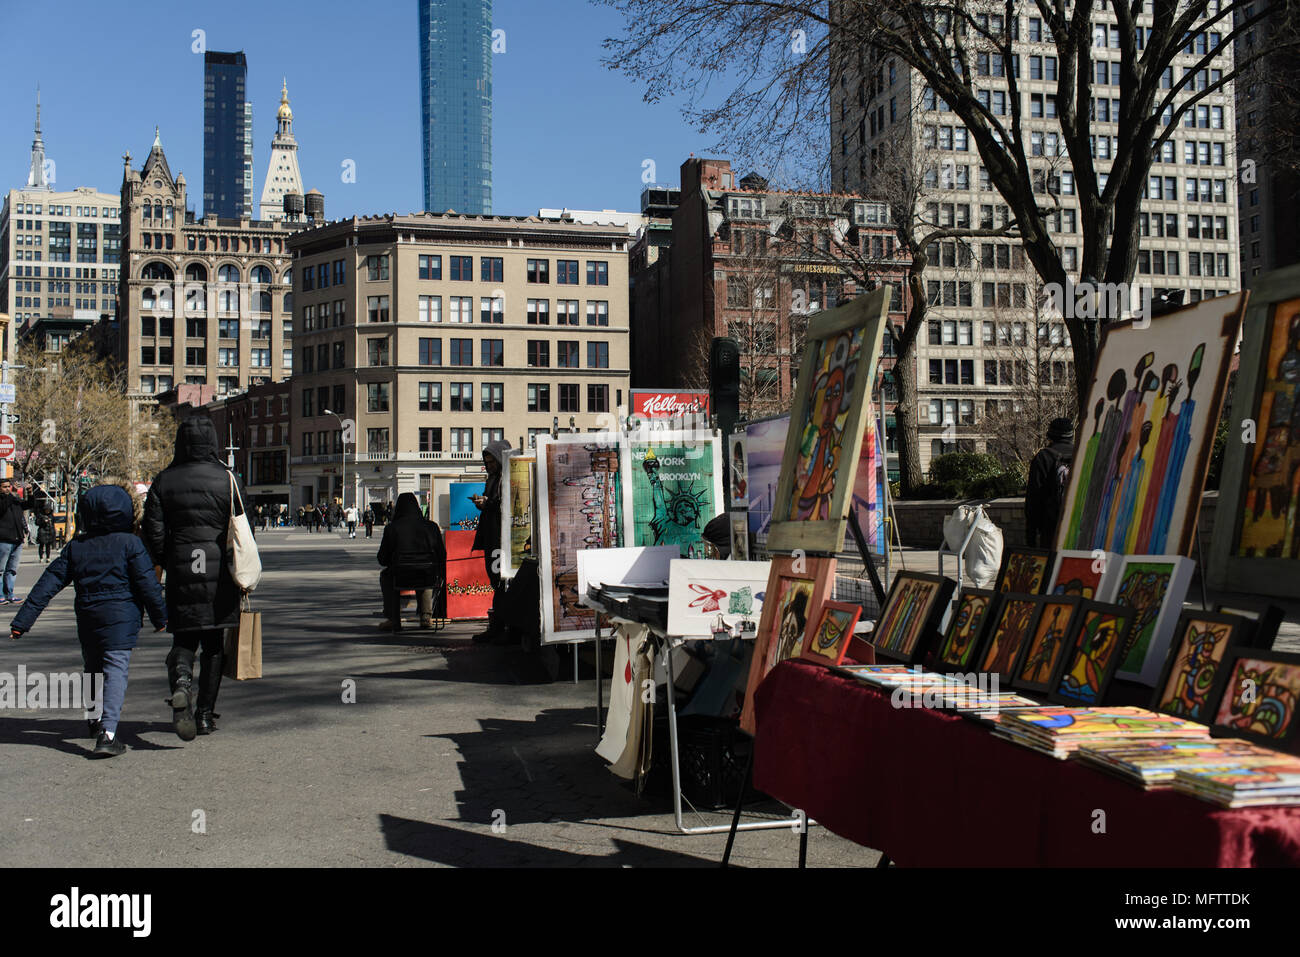 A mother and child walk past stalls selling prints and African art in Union Square. New York, 2018. Stock Photo